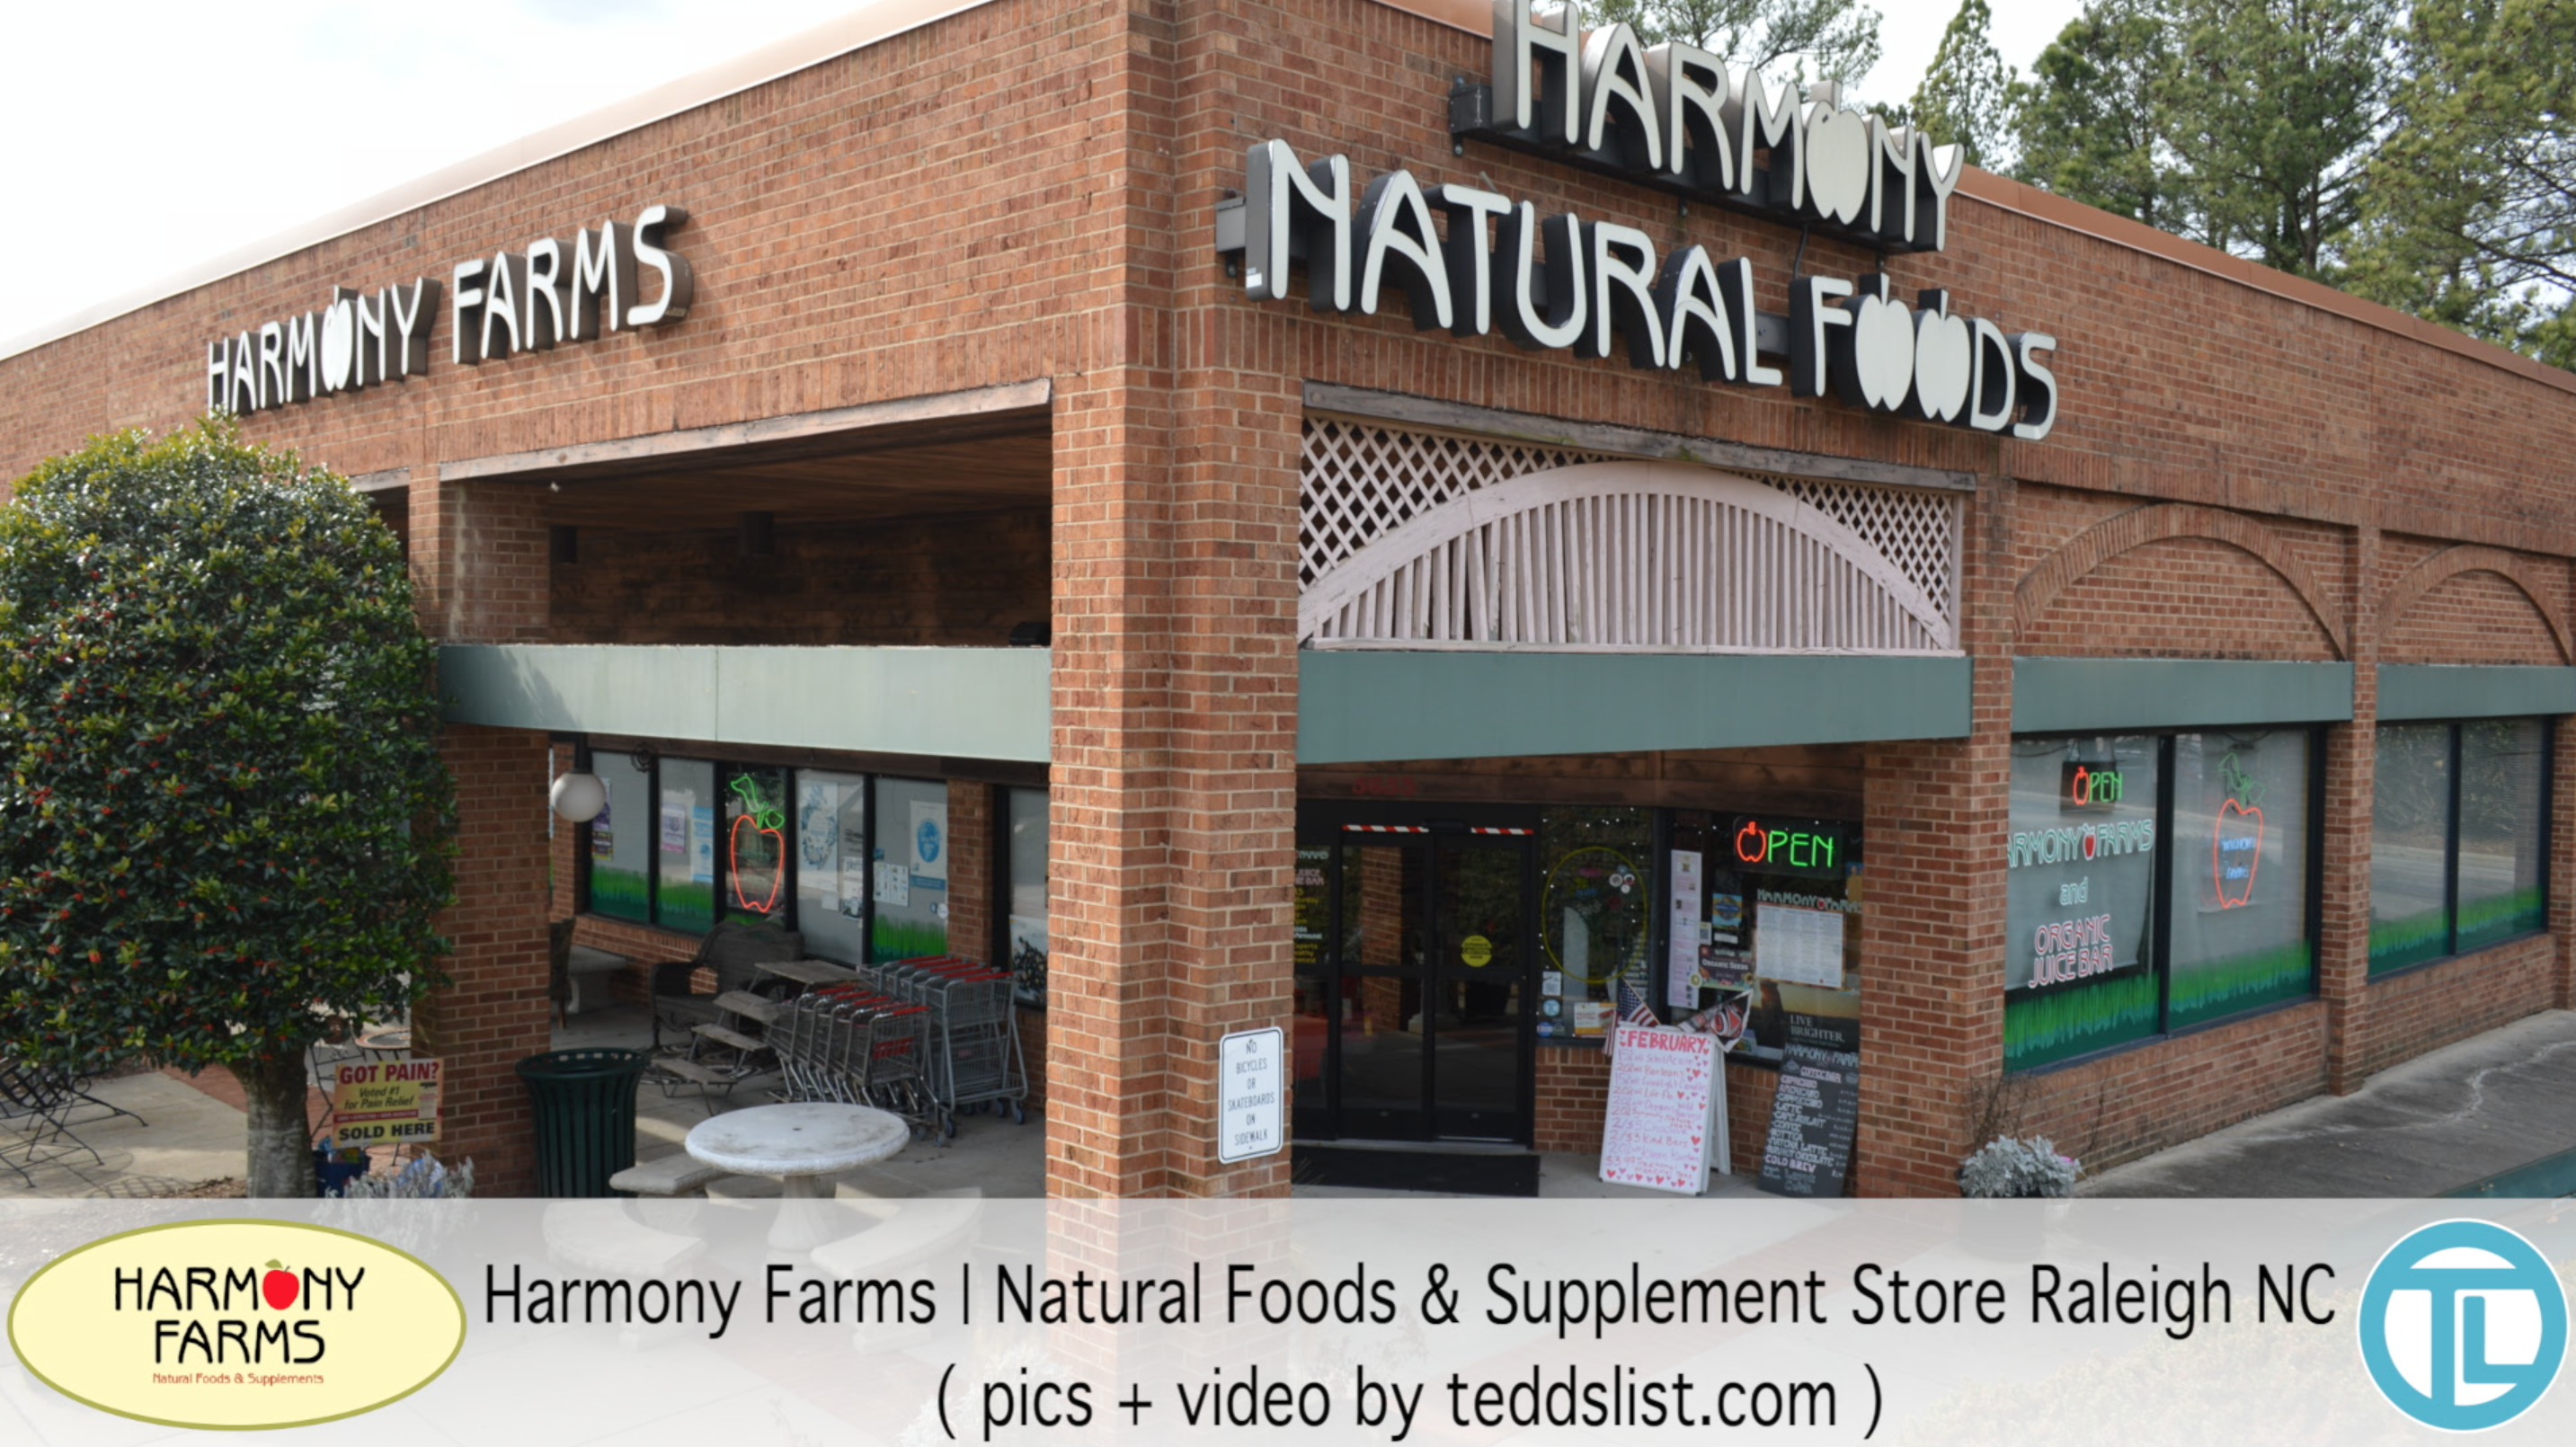 Harmony Farms Natural Food and Supplement Store Raleigh NC